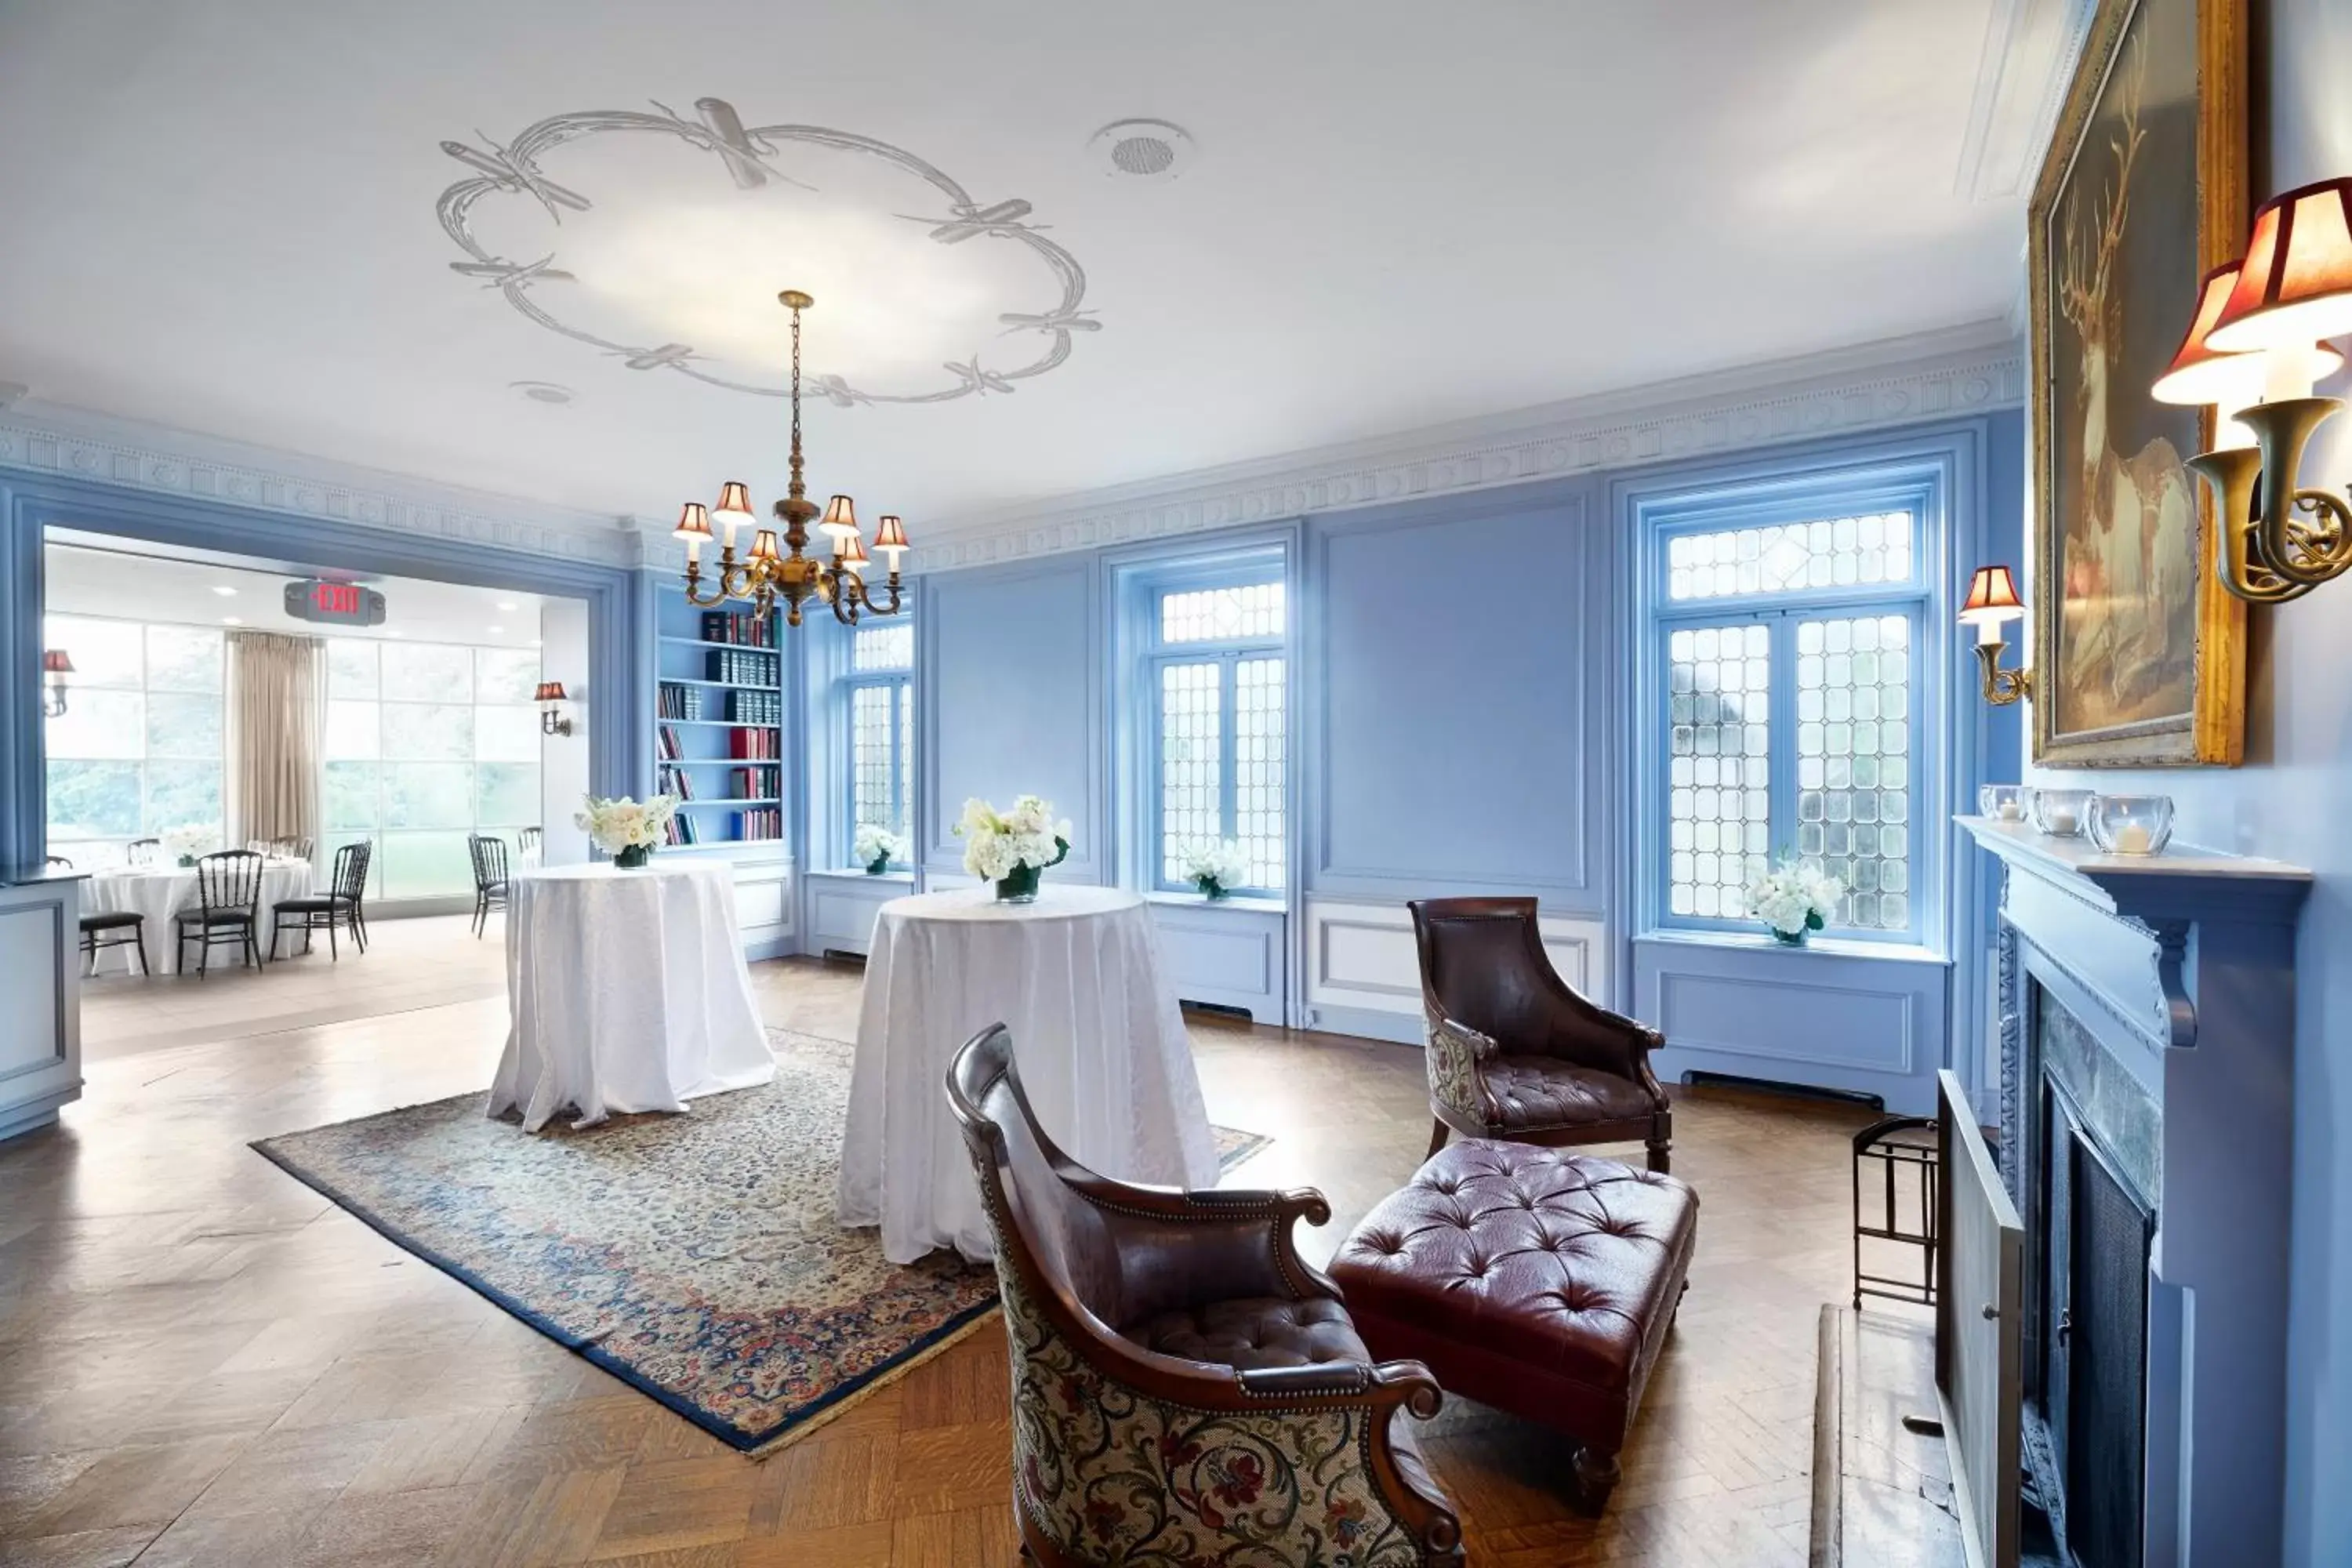 Meeting/conference room in Tarrytown House Estate on the Hudson